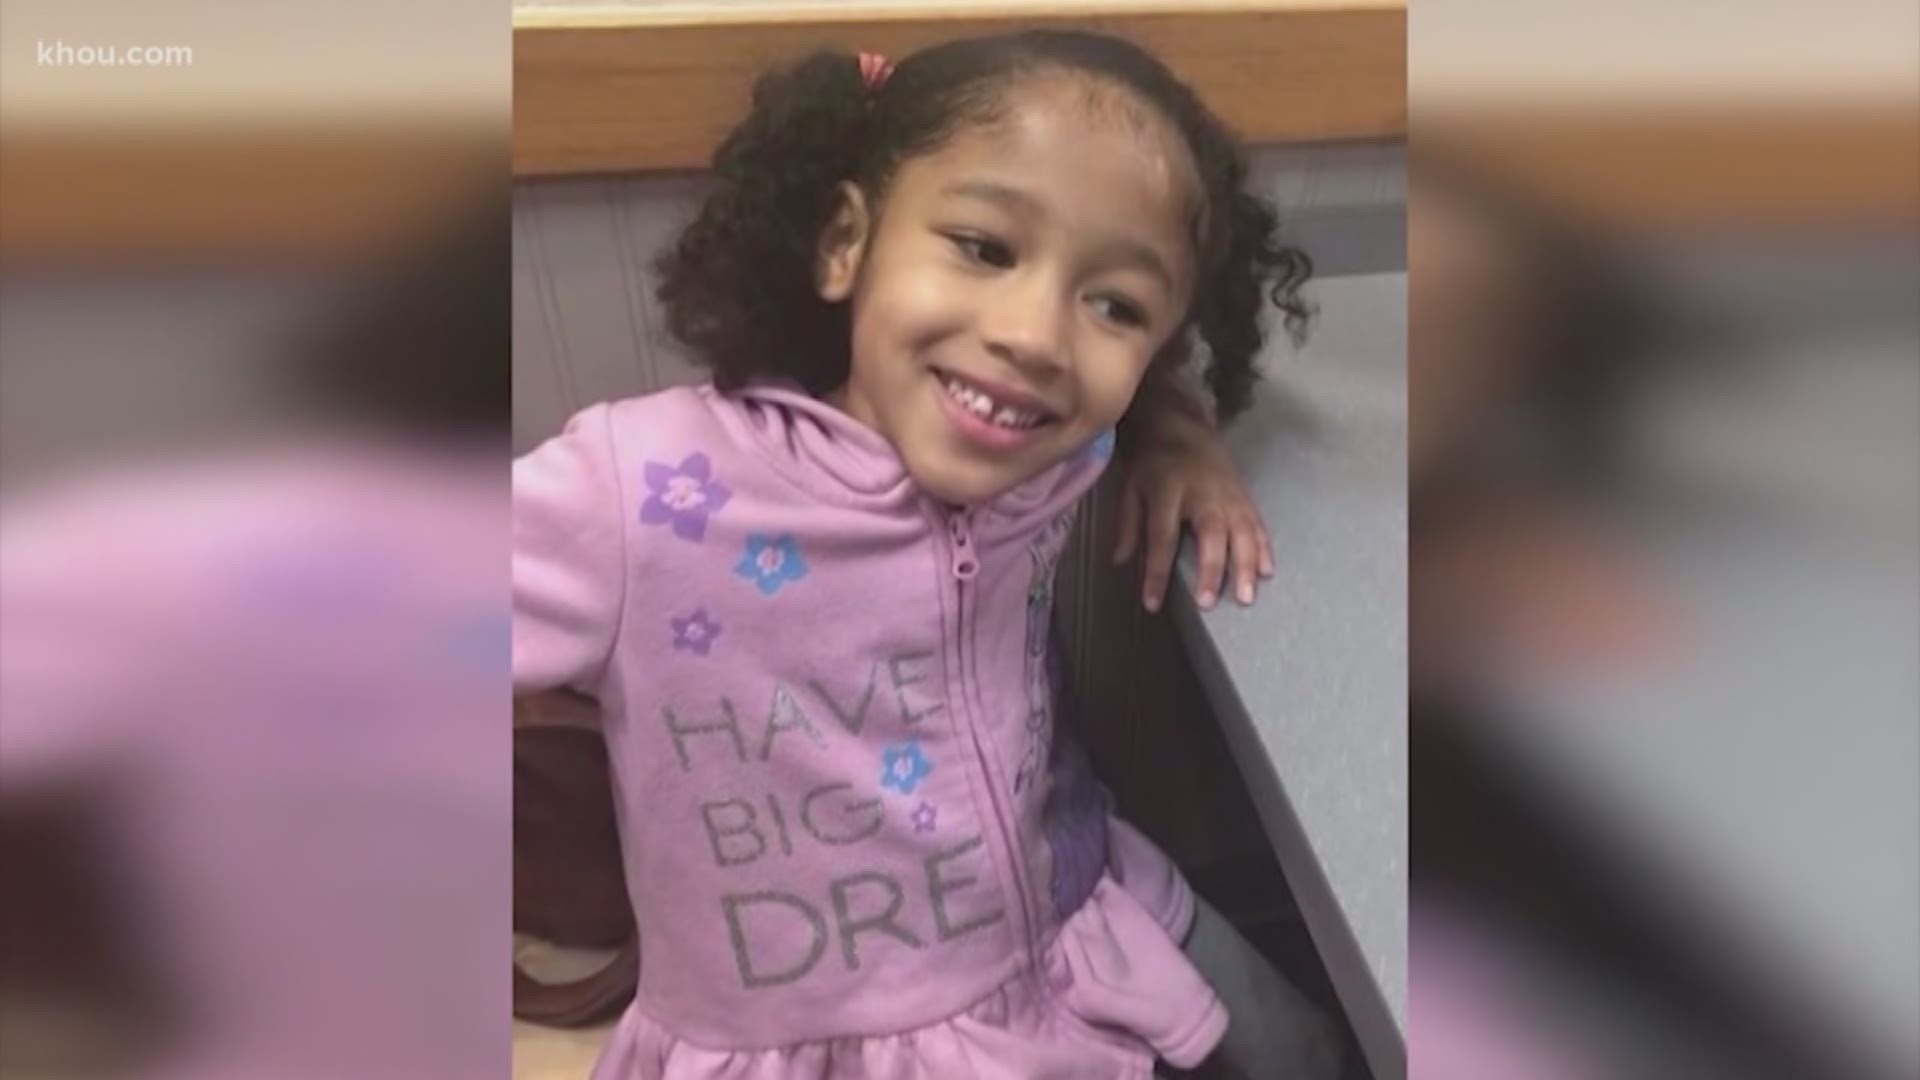 From the time Maleah Davis disappeared on April 30 to May 31 when her stepfather Derion Vence reportedly told Quannel X where her body is, here is a timeline of events in the 4-year-old's case.